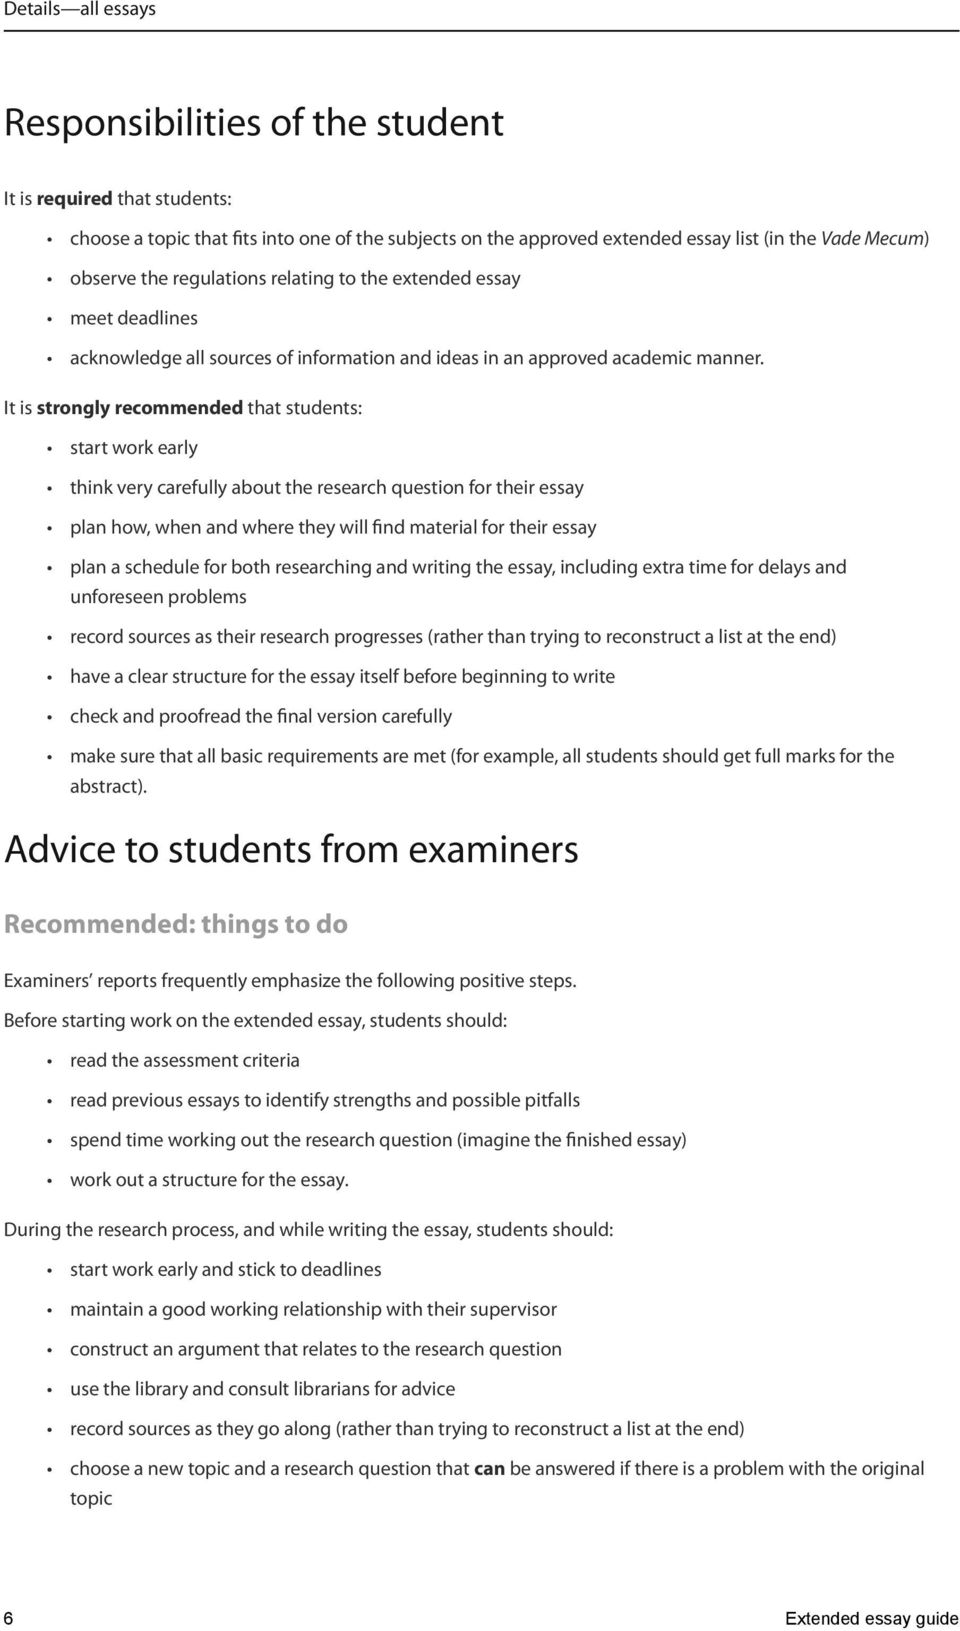 It is strongly recommended that students: start work early think very carefully about the research for their essay plan how, when and where they will find material for their essay plan a schedule for